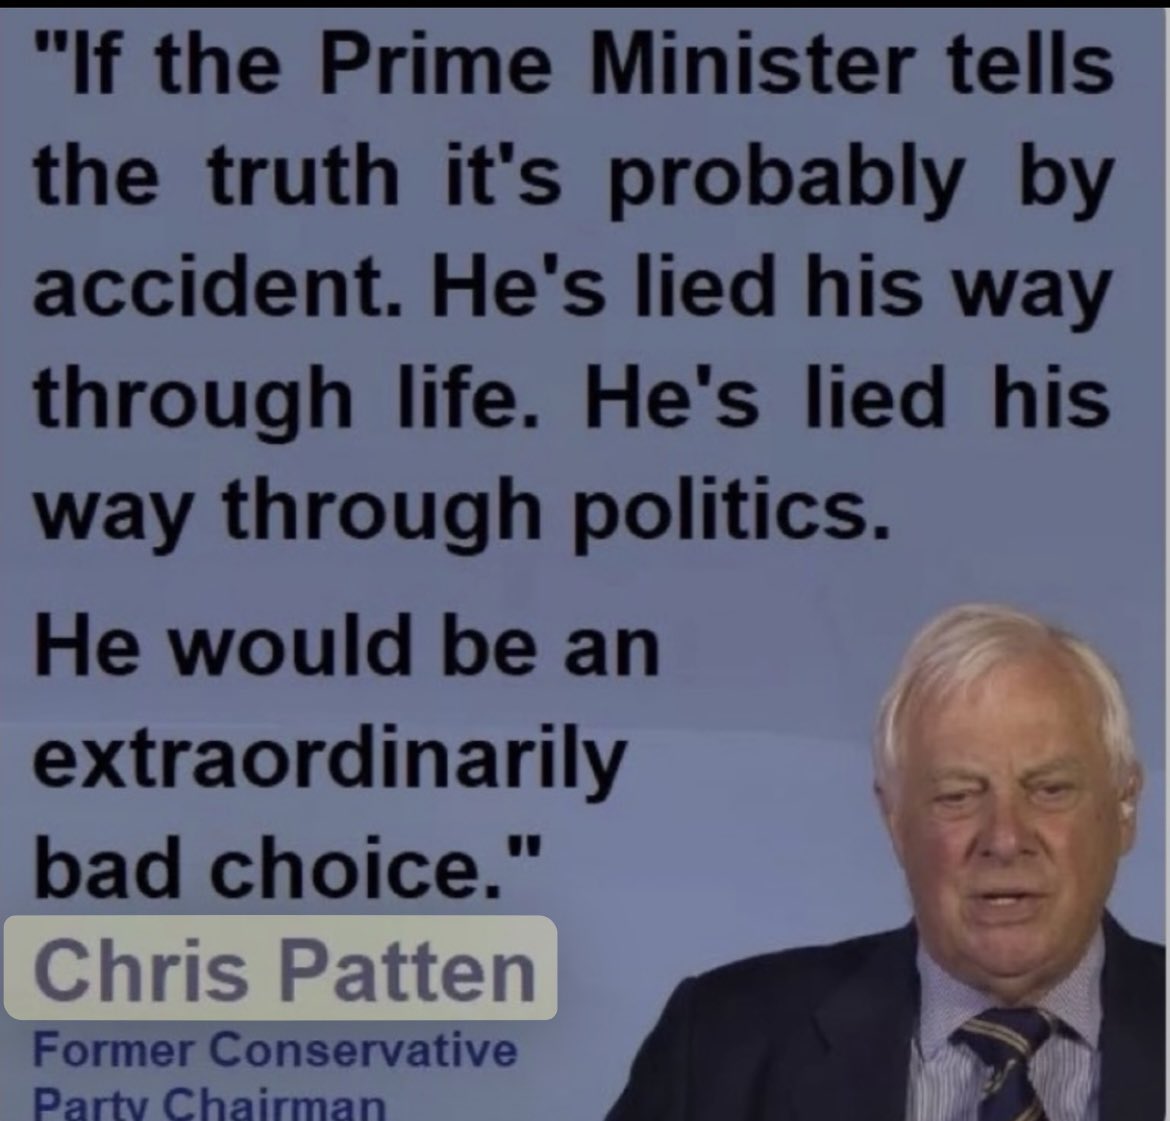 @CentralBylines A quick reminder that Chris Patten has made some very astute assessments in his time…

#BorisJohnson #UnfitForOffice
#PartyGate #BrexitDisaster
#ToriesDestroyingOurCountry 
#BBCQT